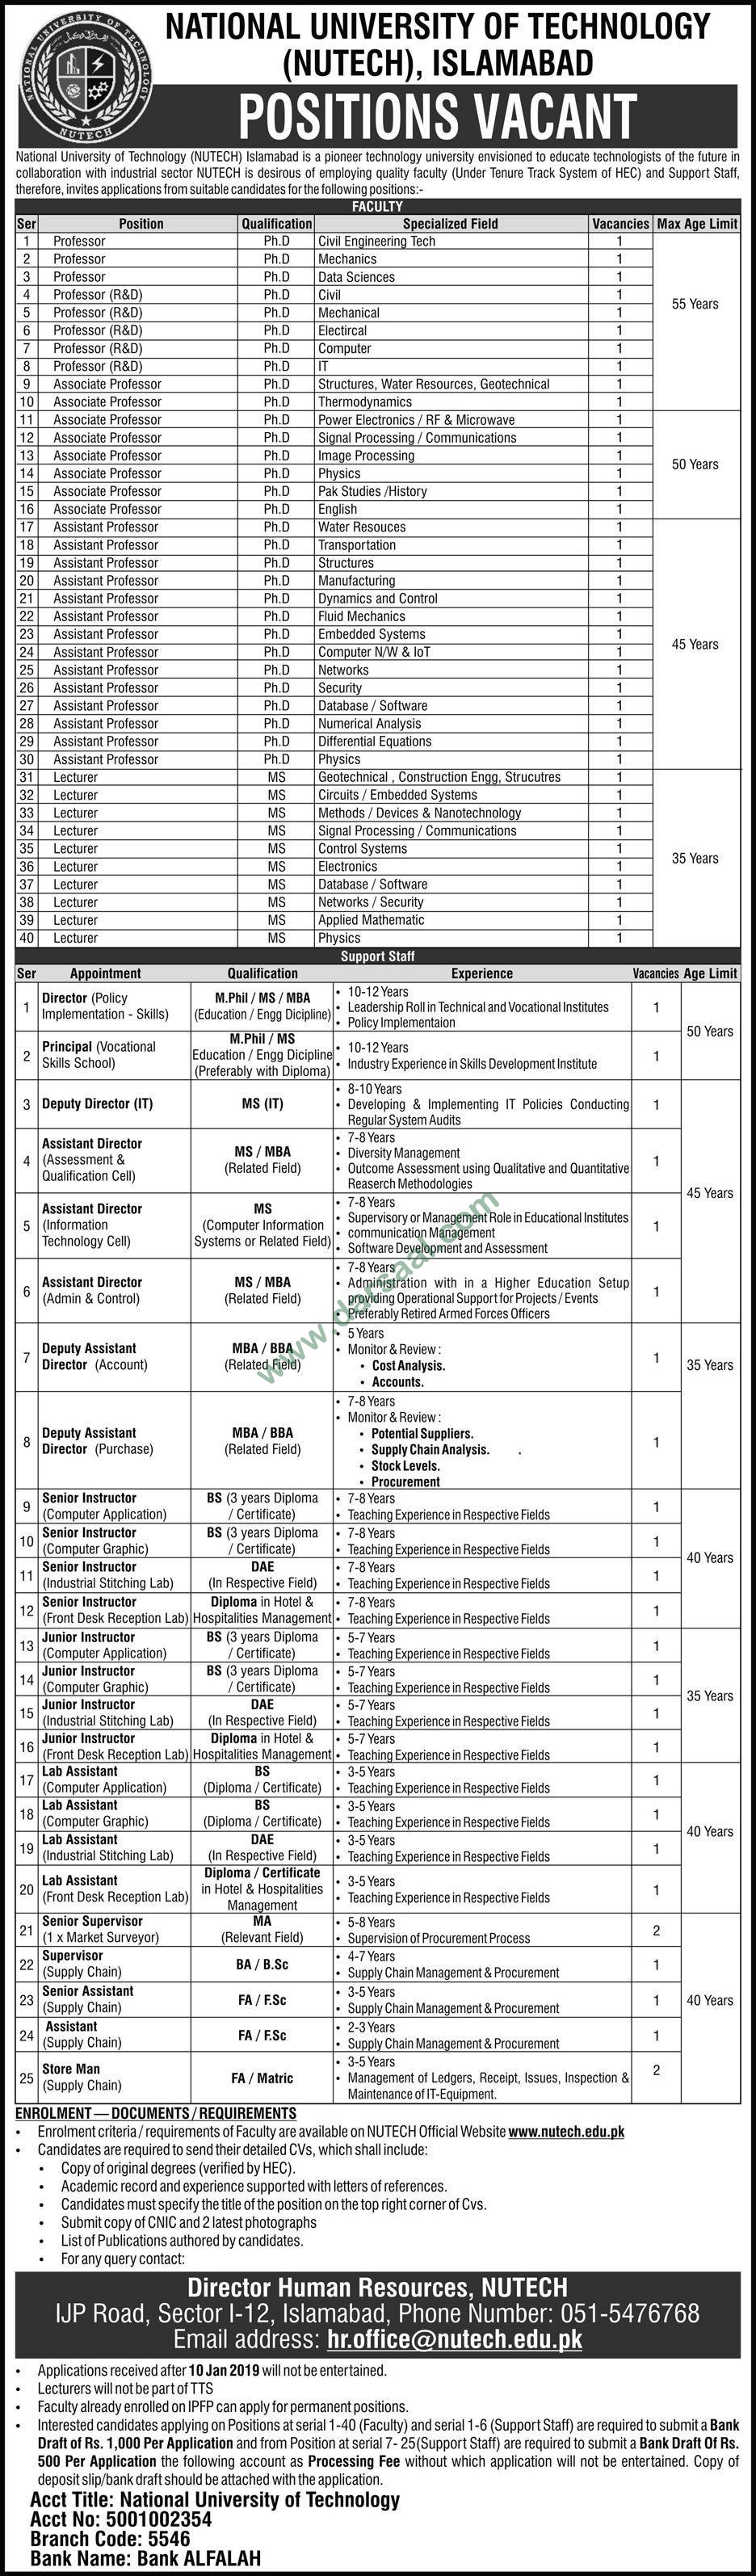 Lab Assistant Jobs in National University of Technology in Islamabad - Dec 24, 2018